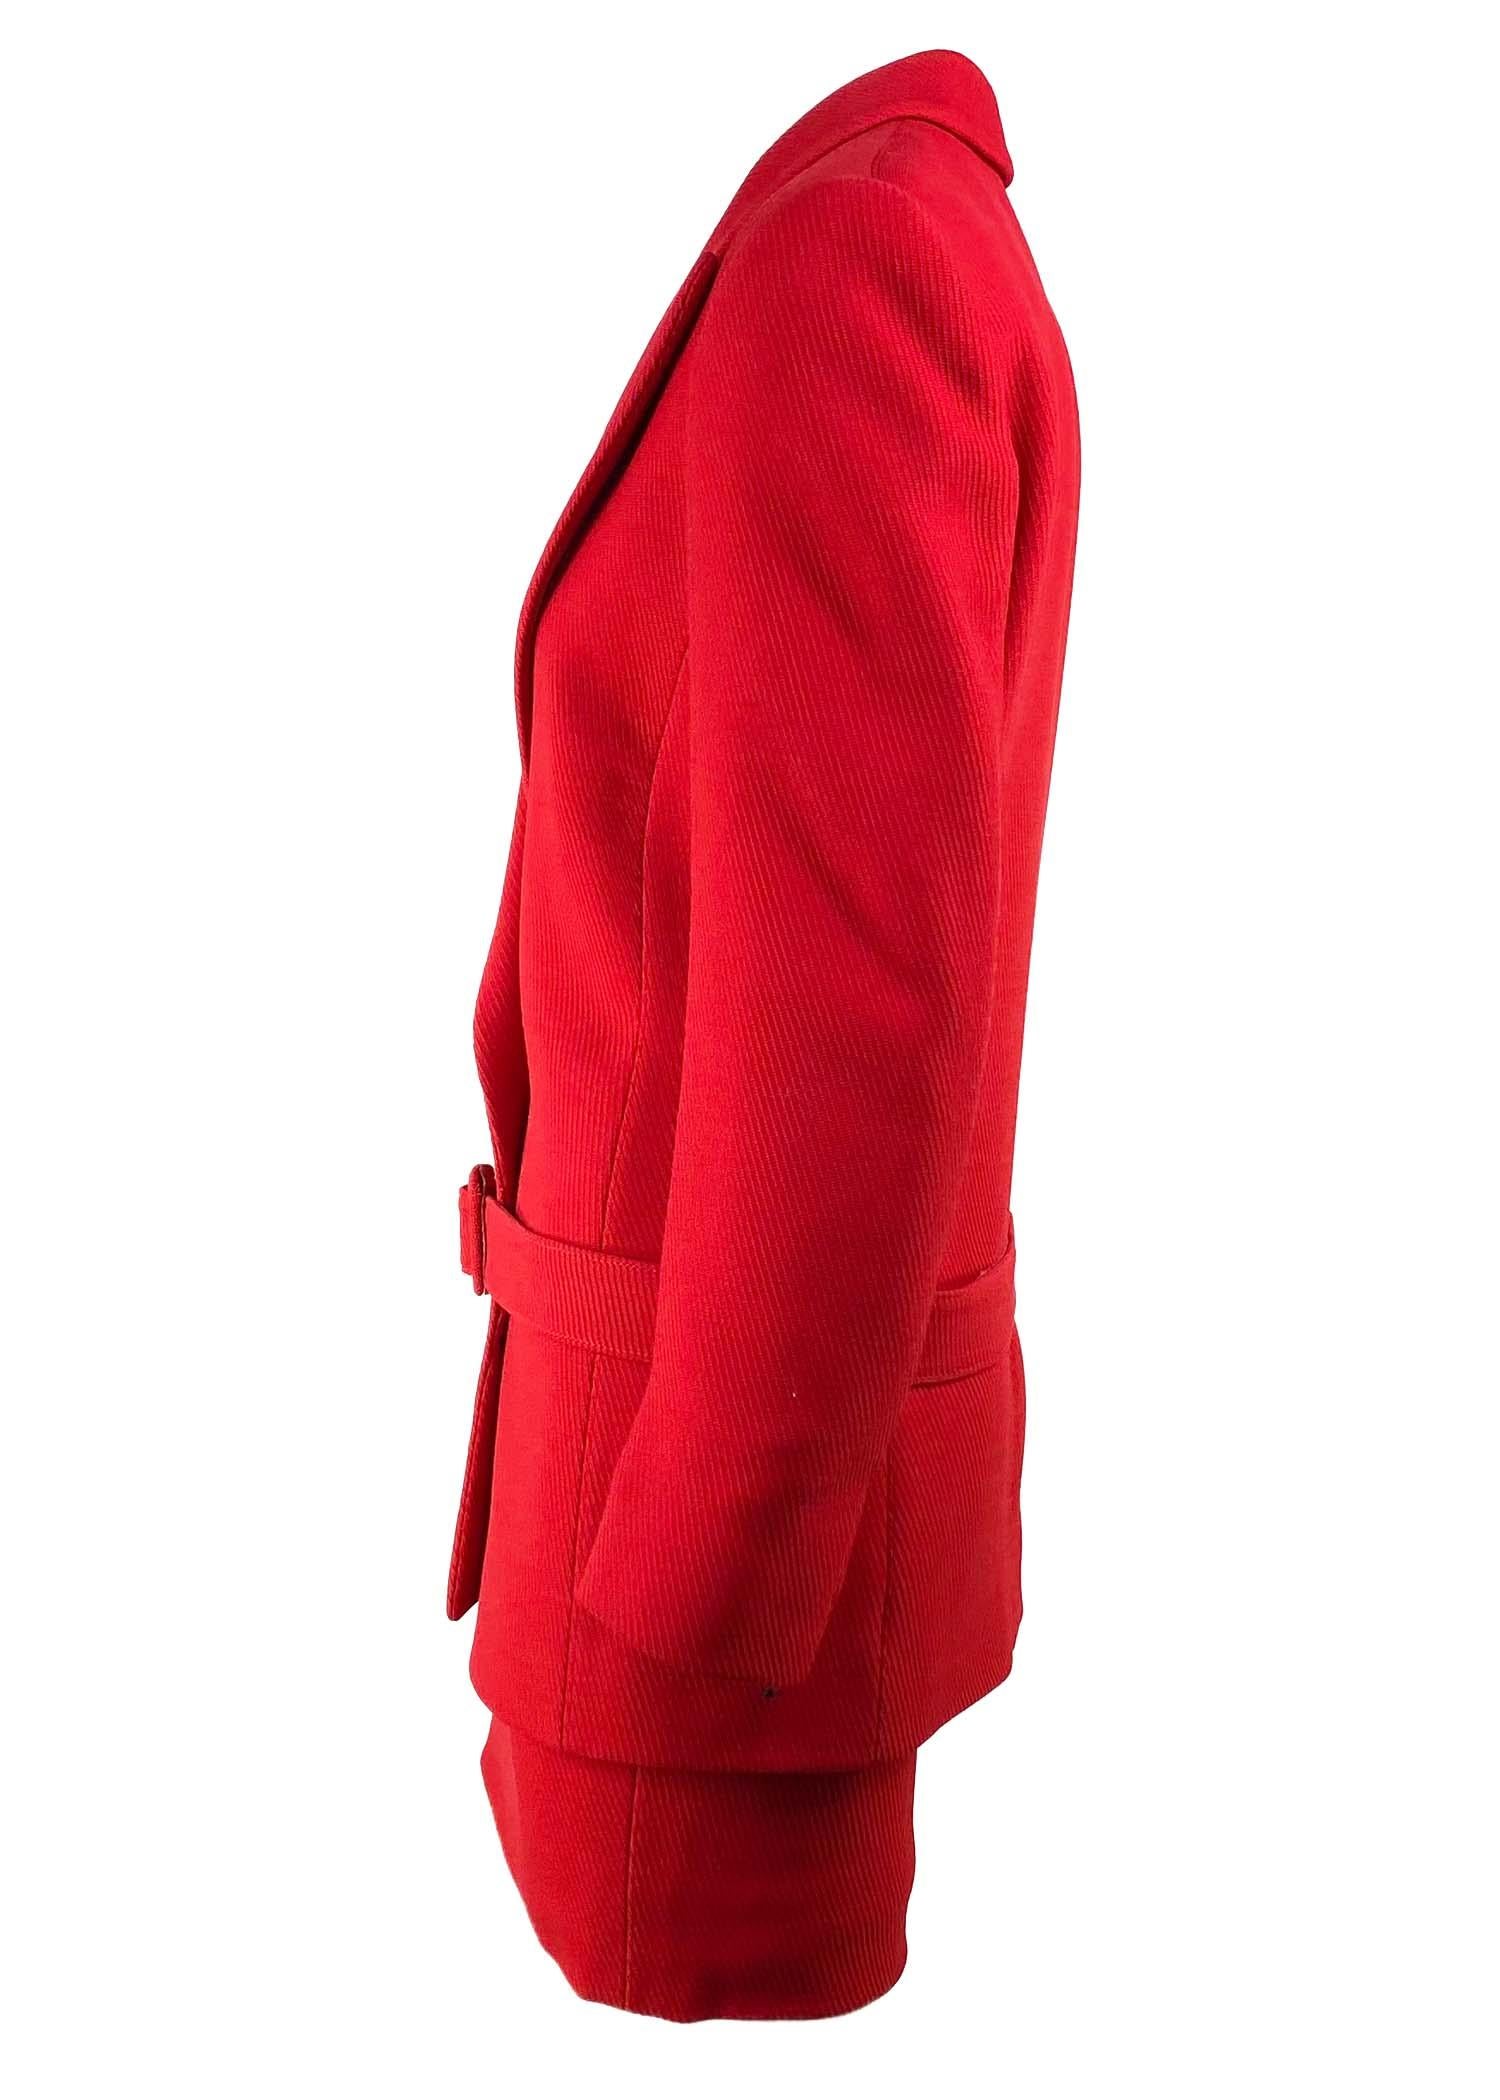 Women's NWT F/W 1997 Gianni Versace Final Runway Red Wool Belted Skirt Suit New For Sale